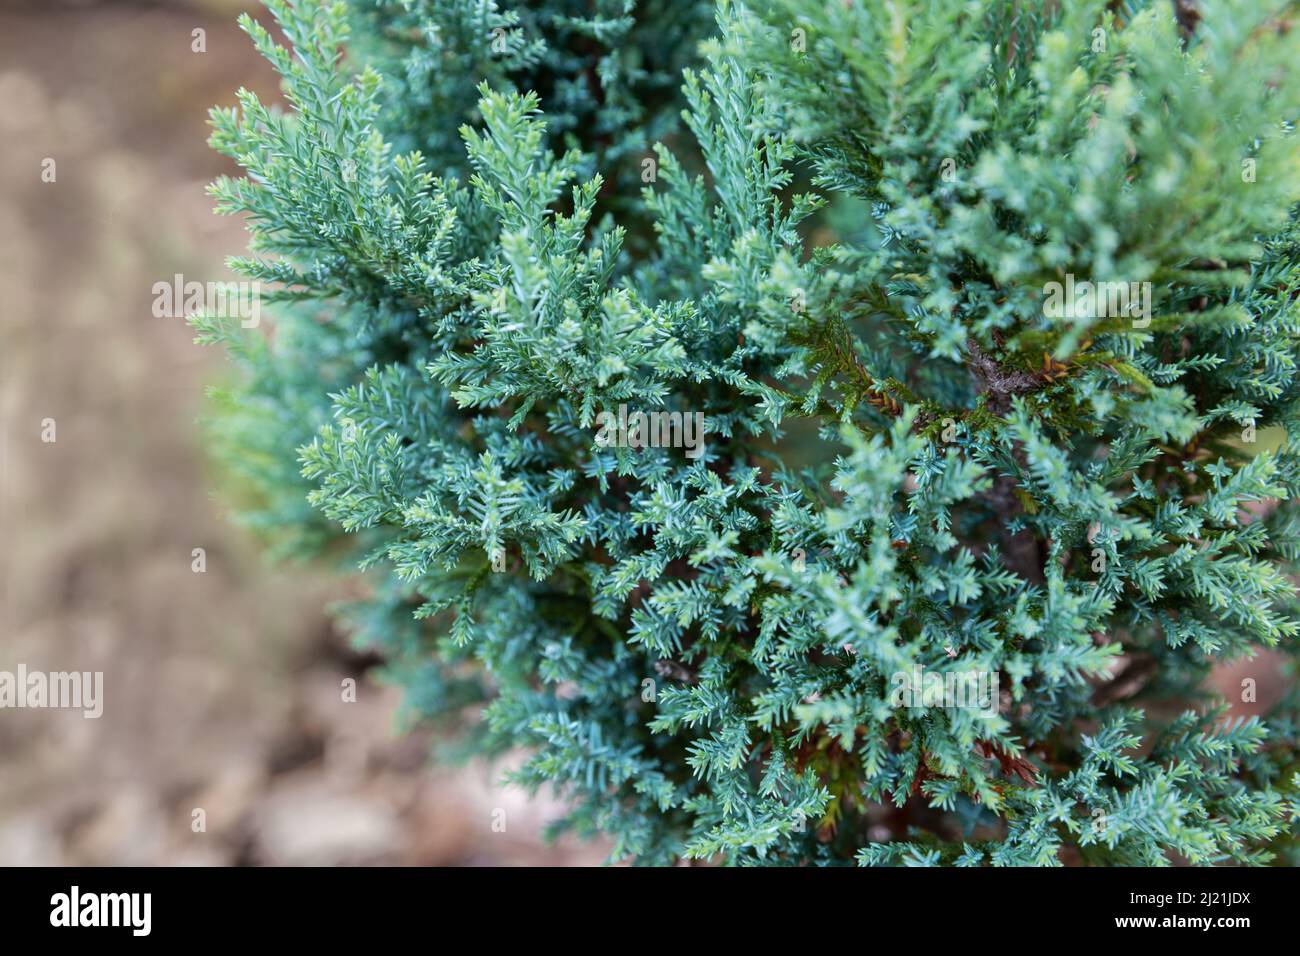 Chamaecyparis with beautiful blue needles. Branches close-up. Ornamental dwarf plant for landscaping Stock Photo